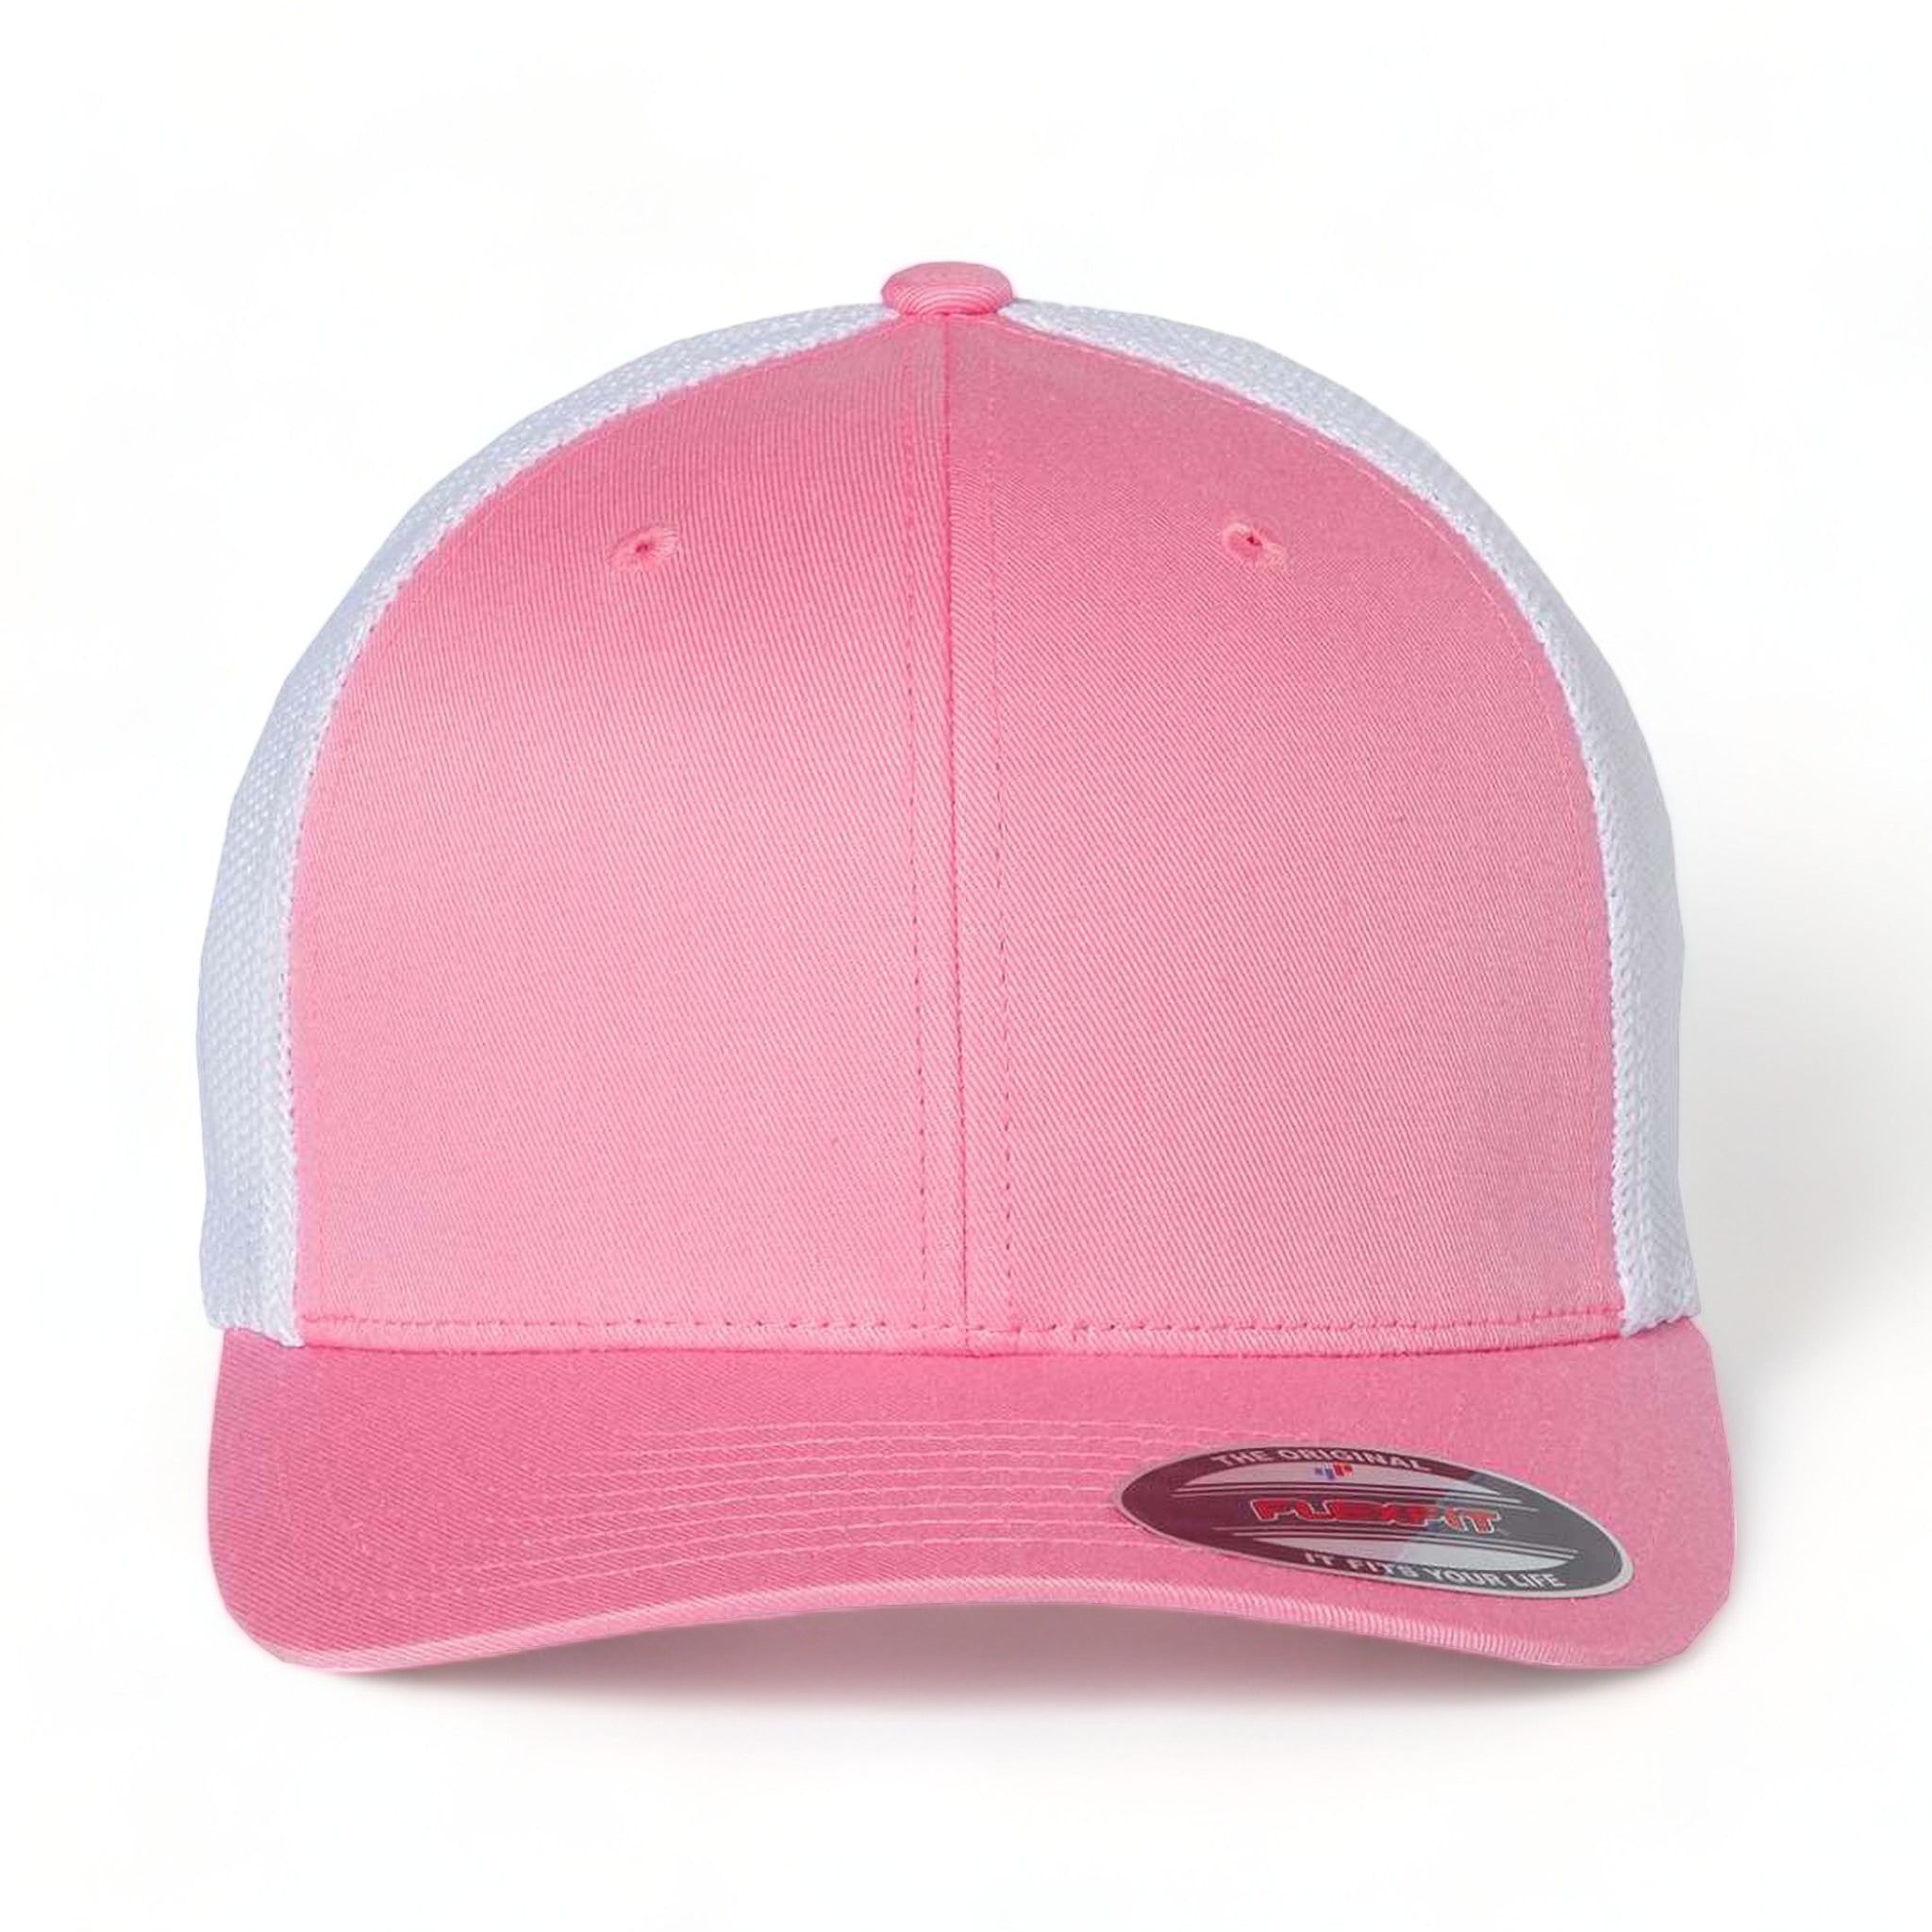 Front view of Flexfit 6511 custom hat in pink and white